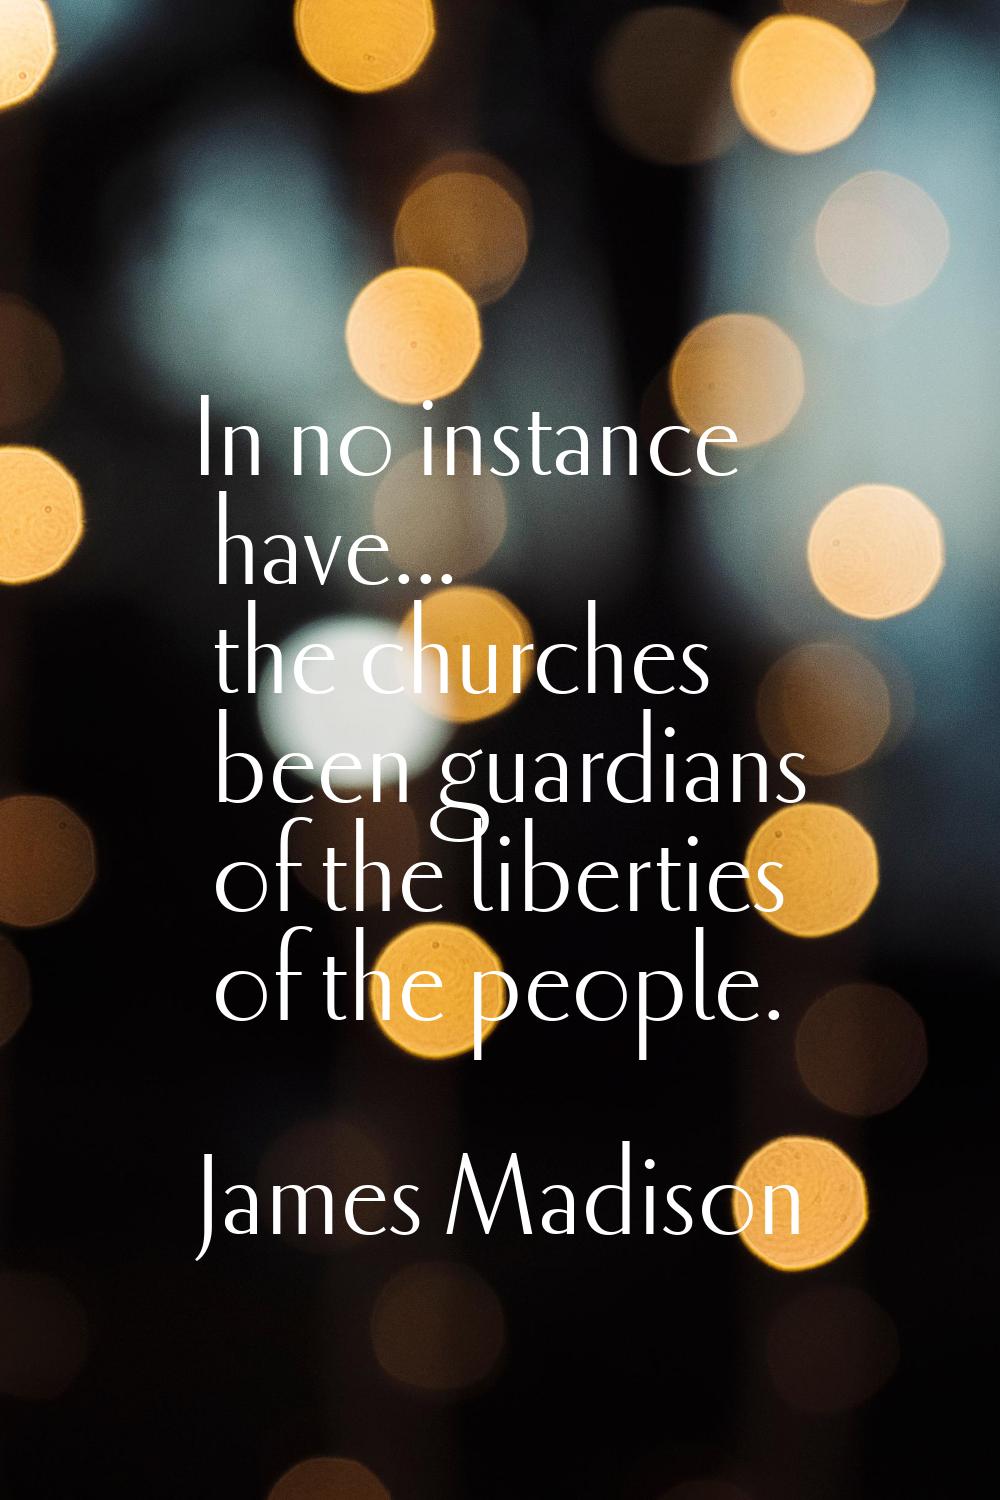 In no instance have... the churches been guardians of the liberties of the people.